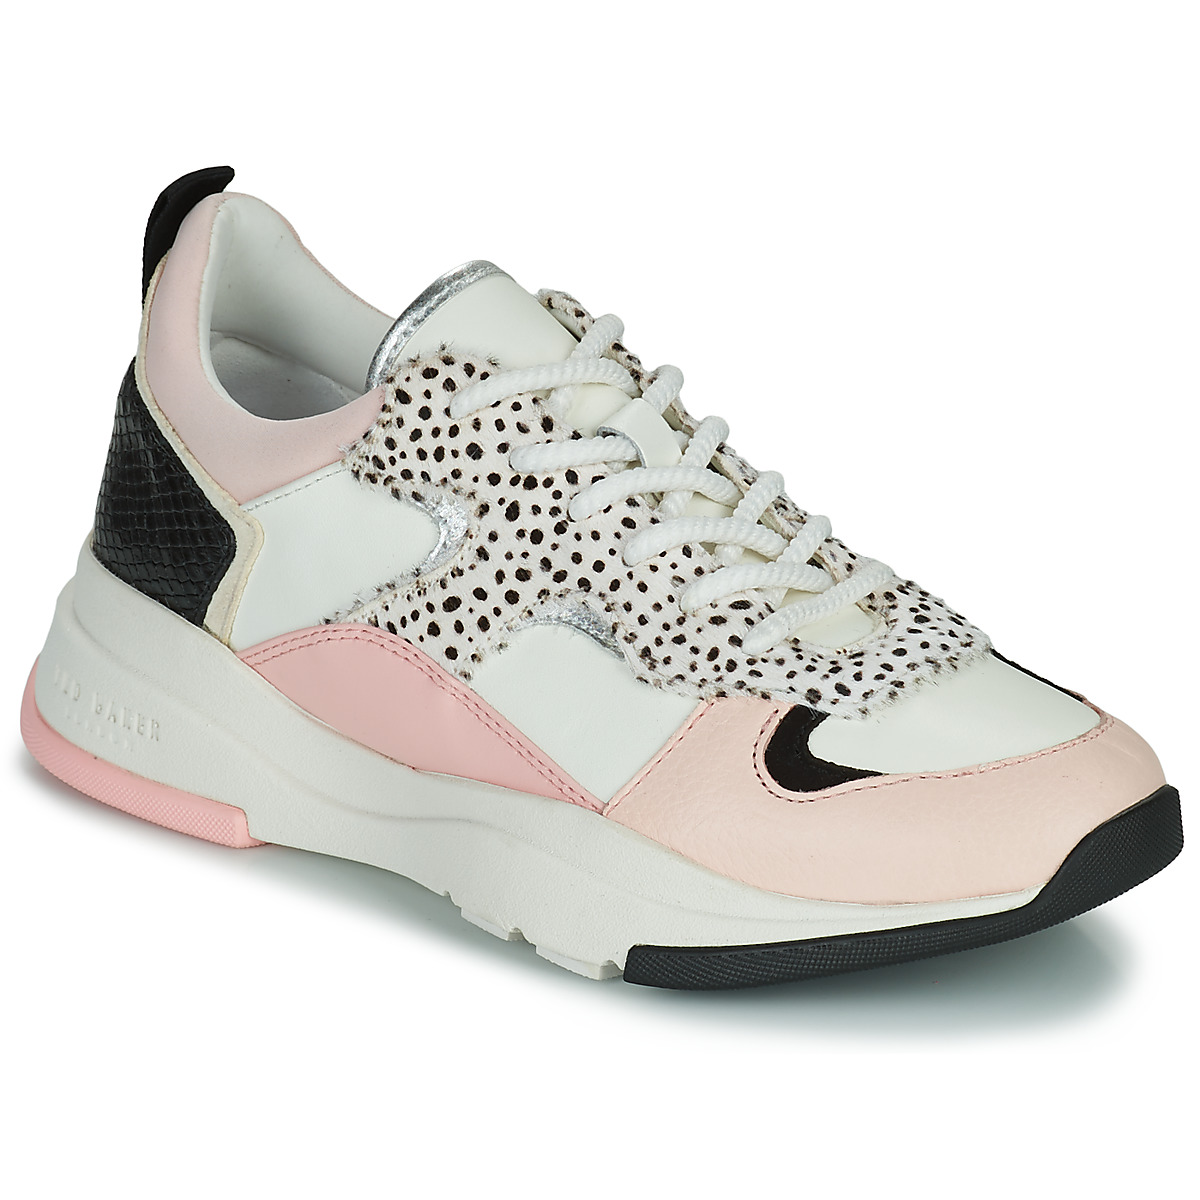 Shoes Women Low top trainers Ted Baker IZSLA White / Pink